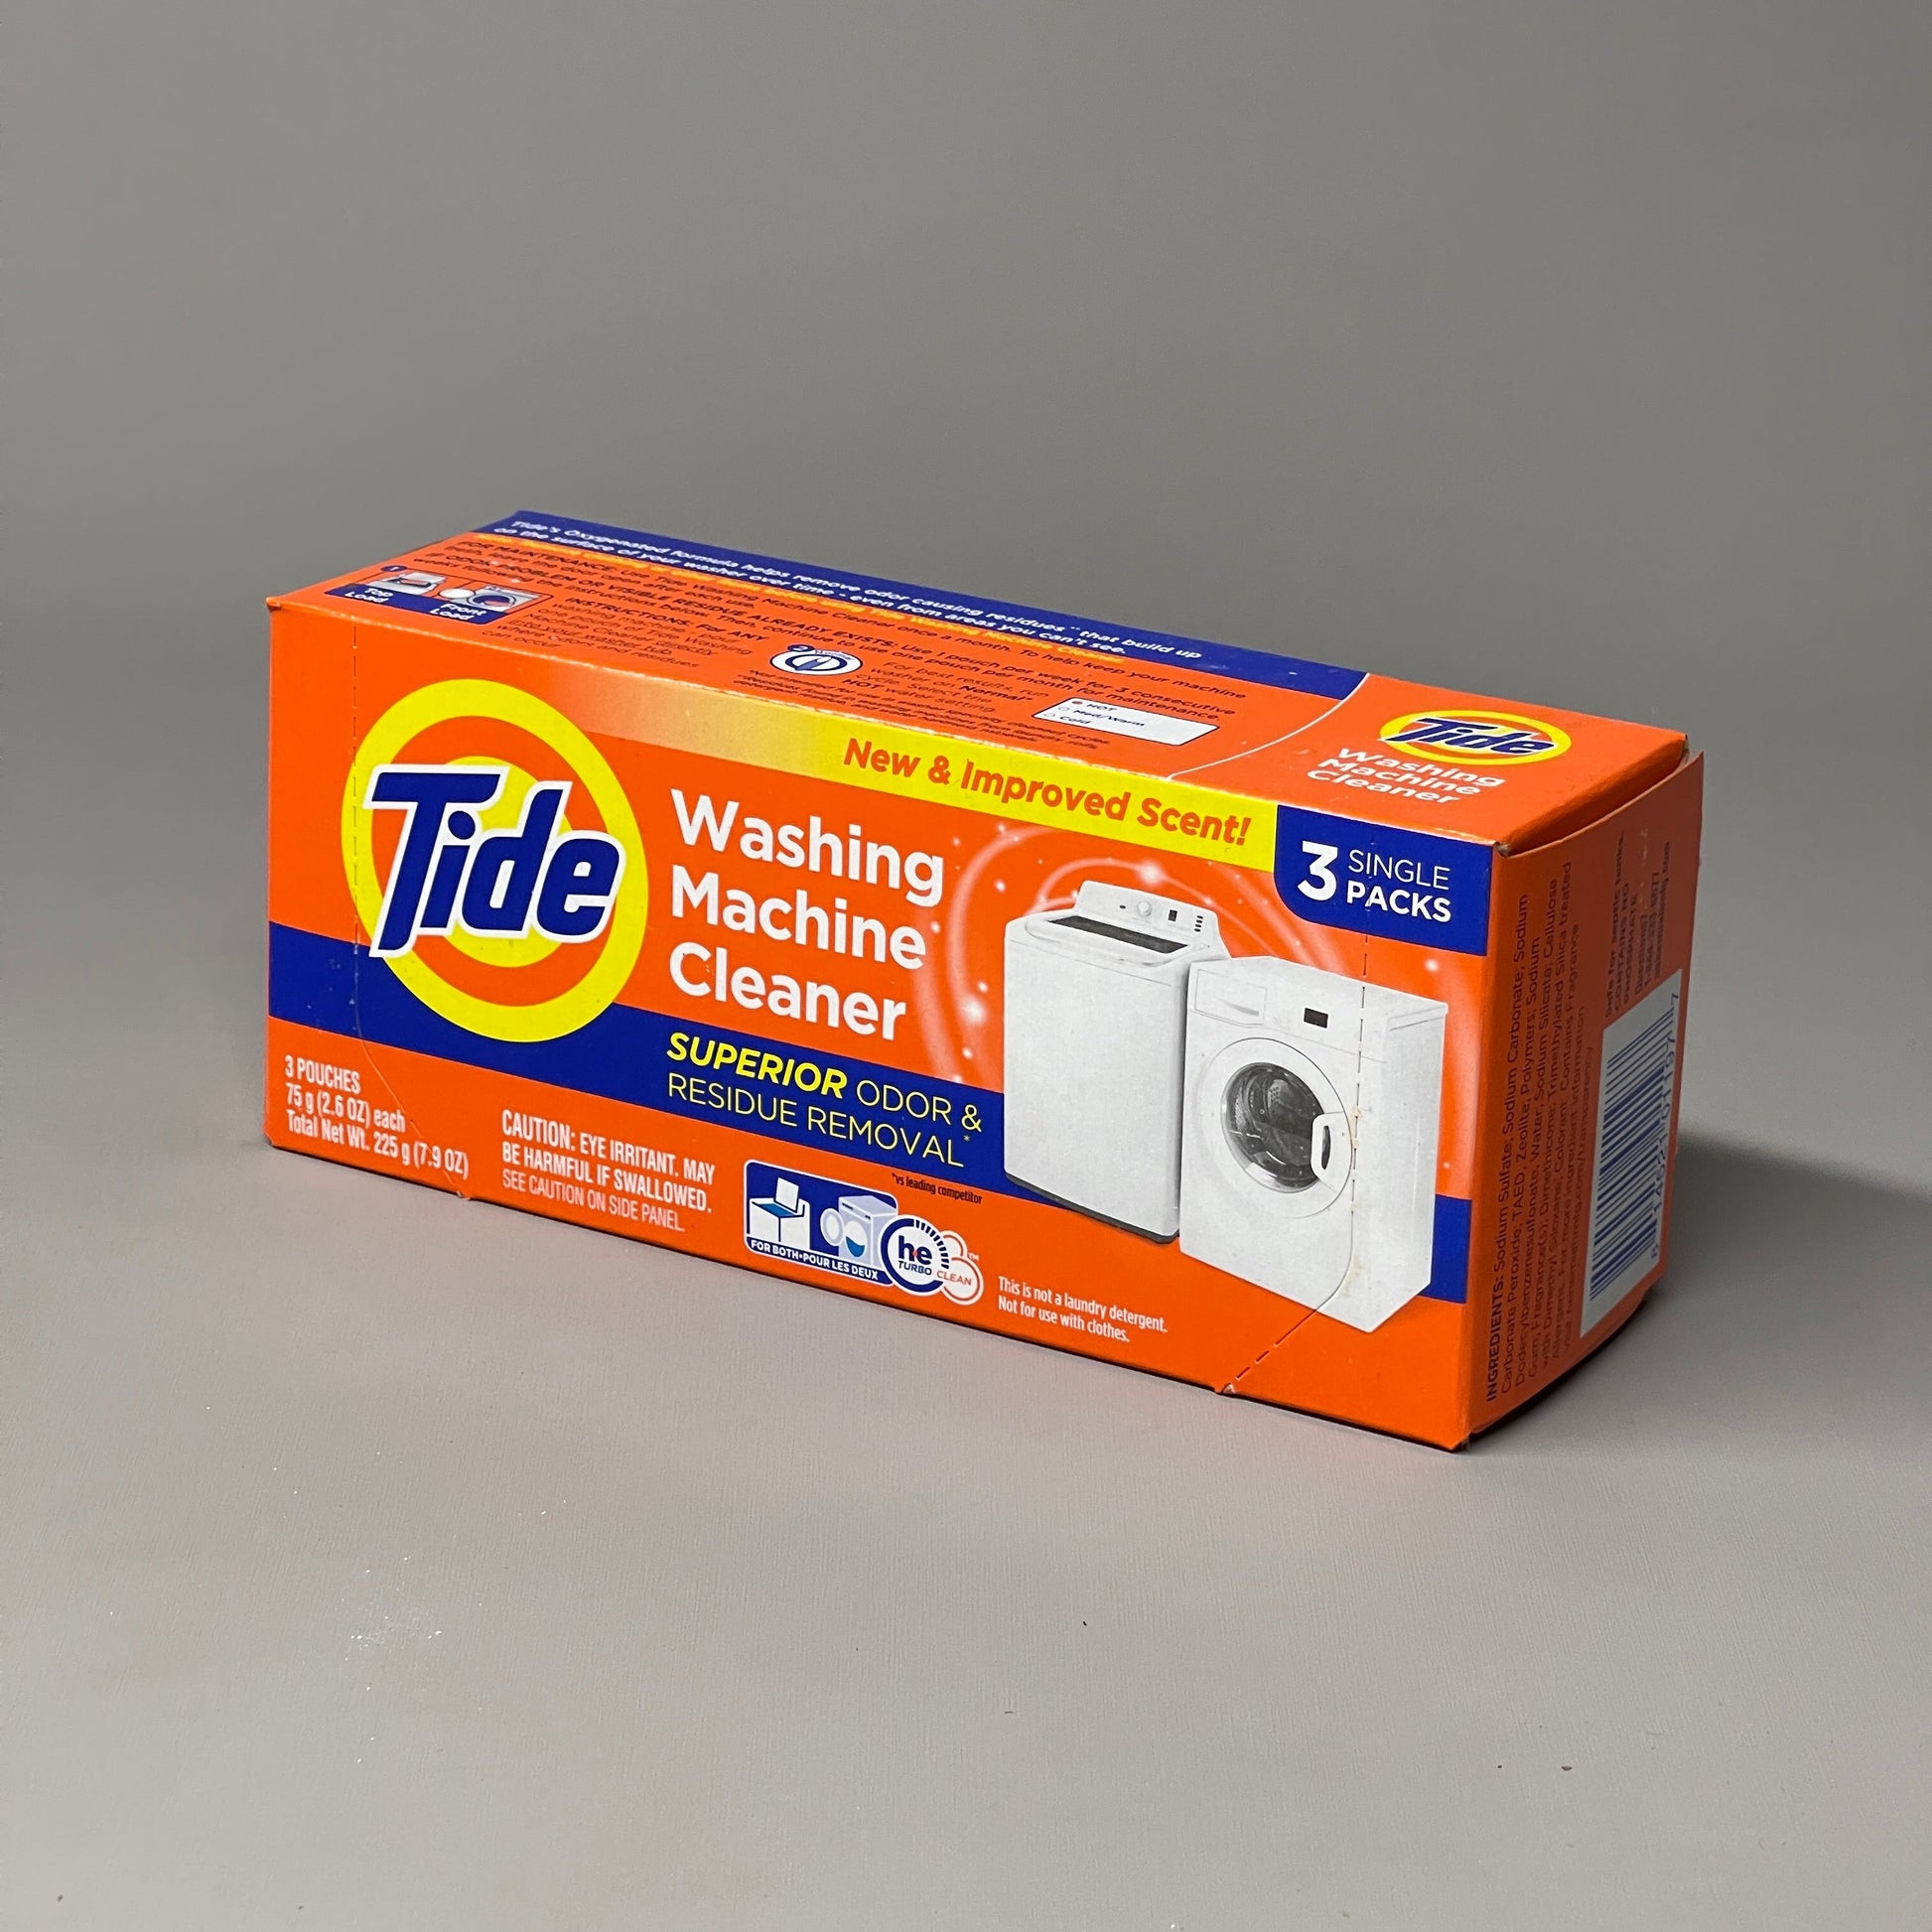 TIDE Washing Machine Cleaner Tablets 3-Pouches (2.6 oz each) Odor & Re –  PayWut